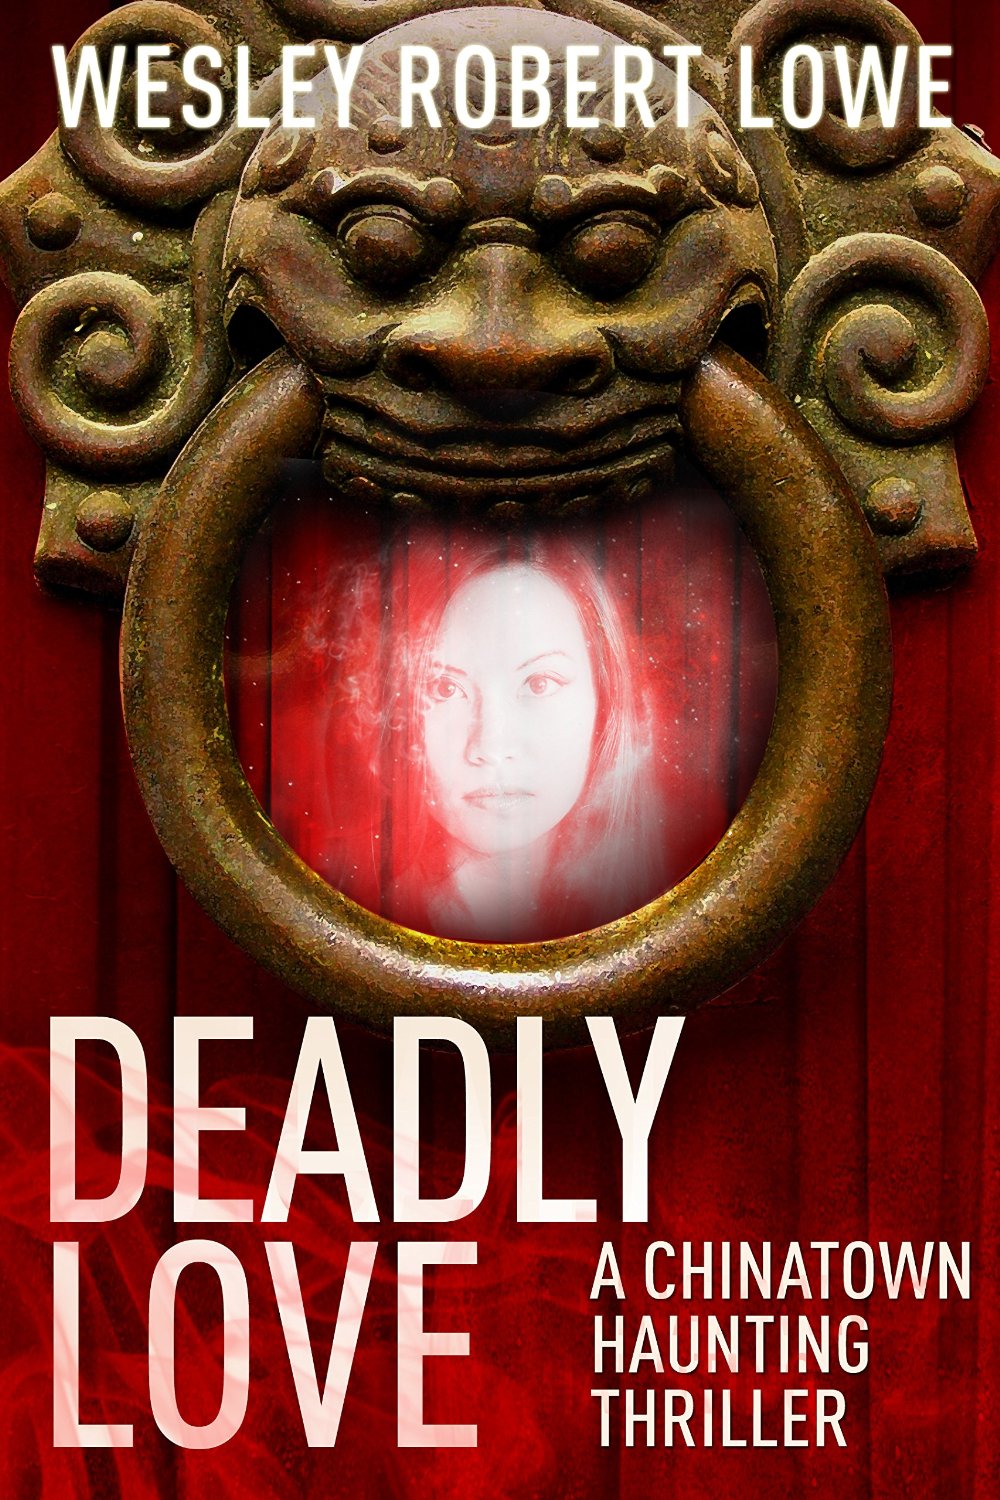 Deadly Love (Chinatown Haunting Book 1) by Wesley Robert Lowe